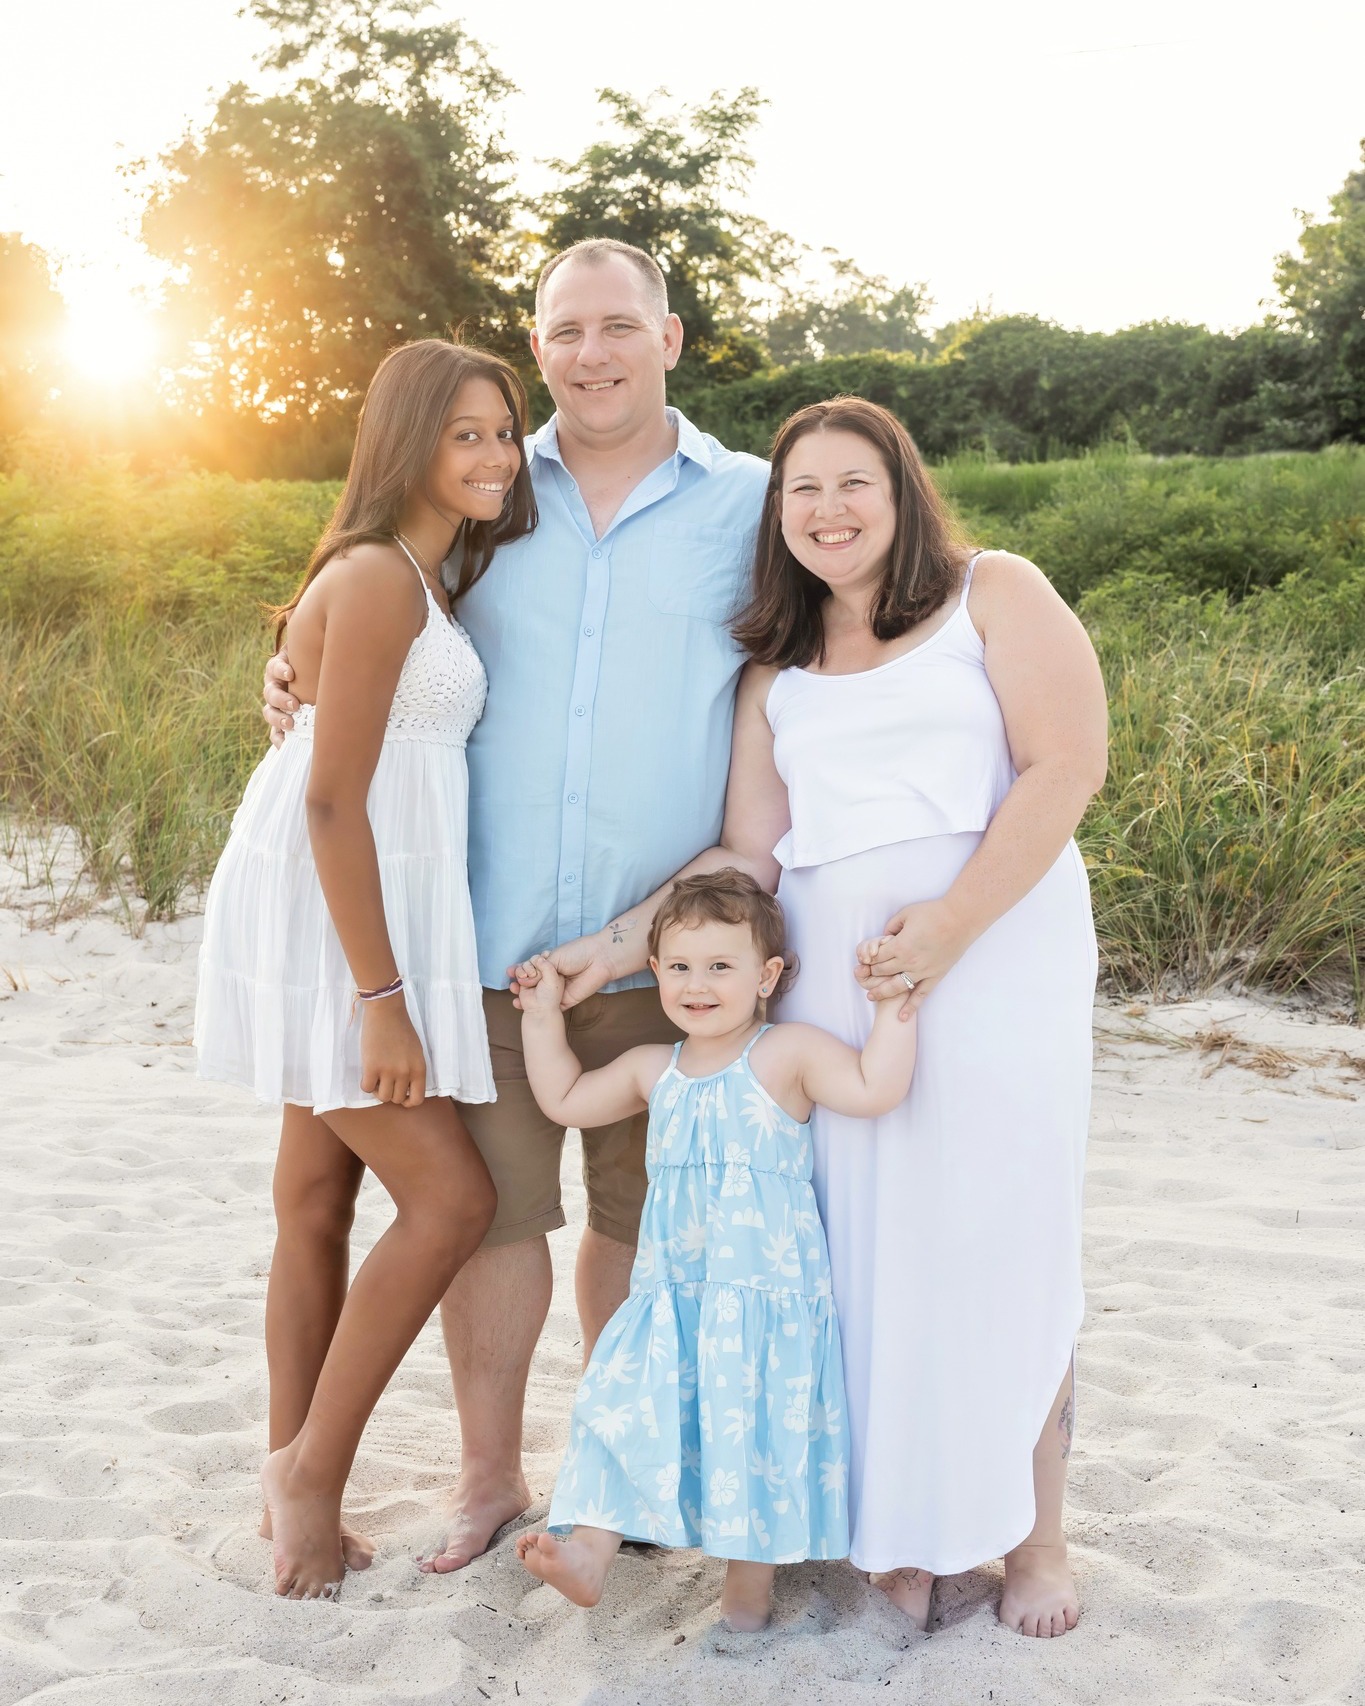 J. Marie Photography 15 Freedom Way, Niantic Connecticut 06357